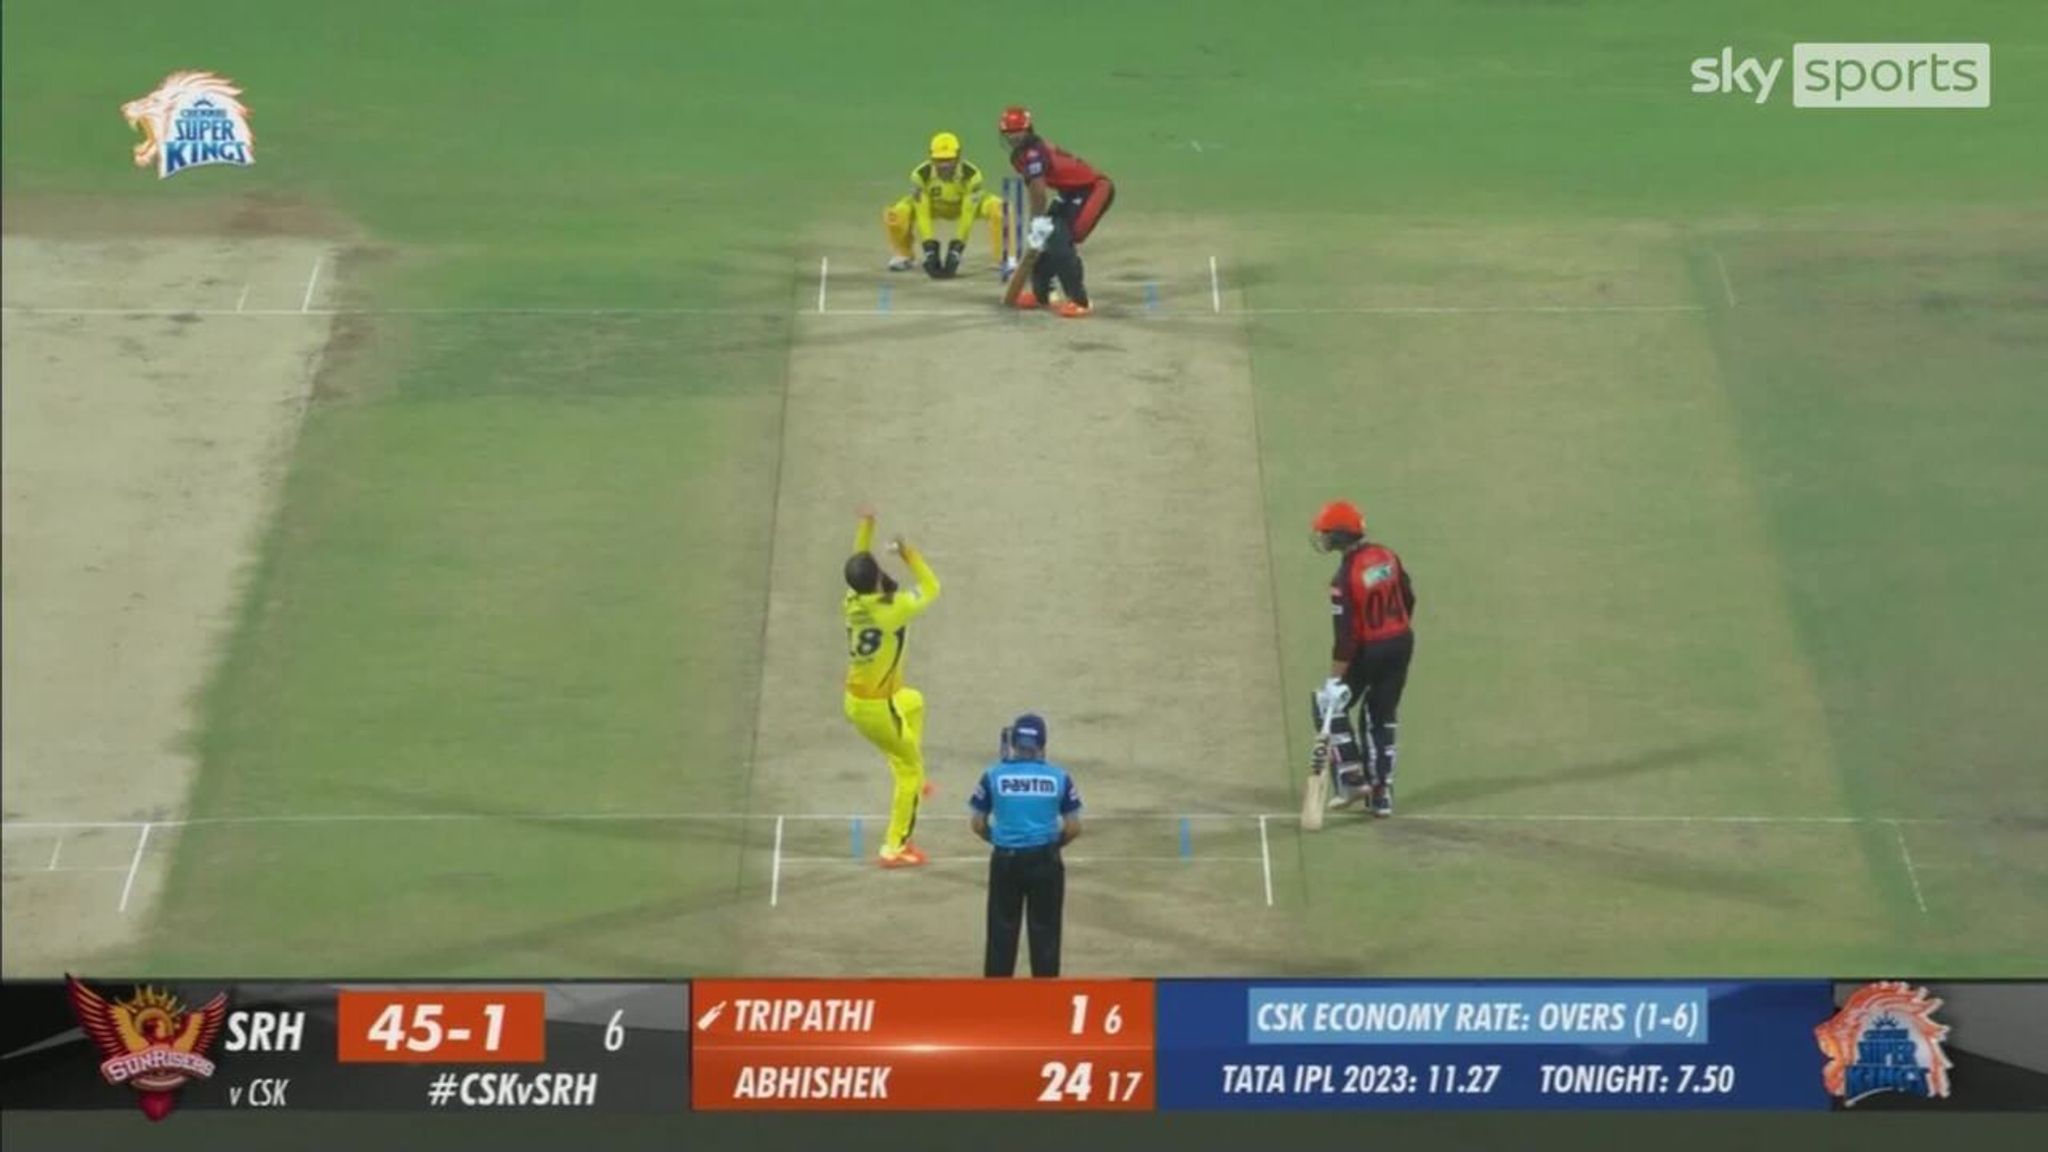 Devon Conway leads Chennai Super Kings to victory over Sunrisers Hyderabad Video Watch TV Show Sky Sports